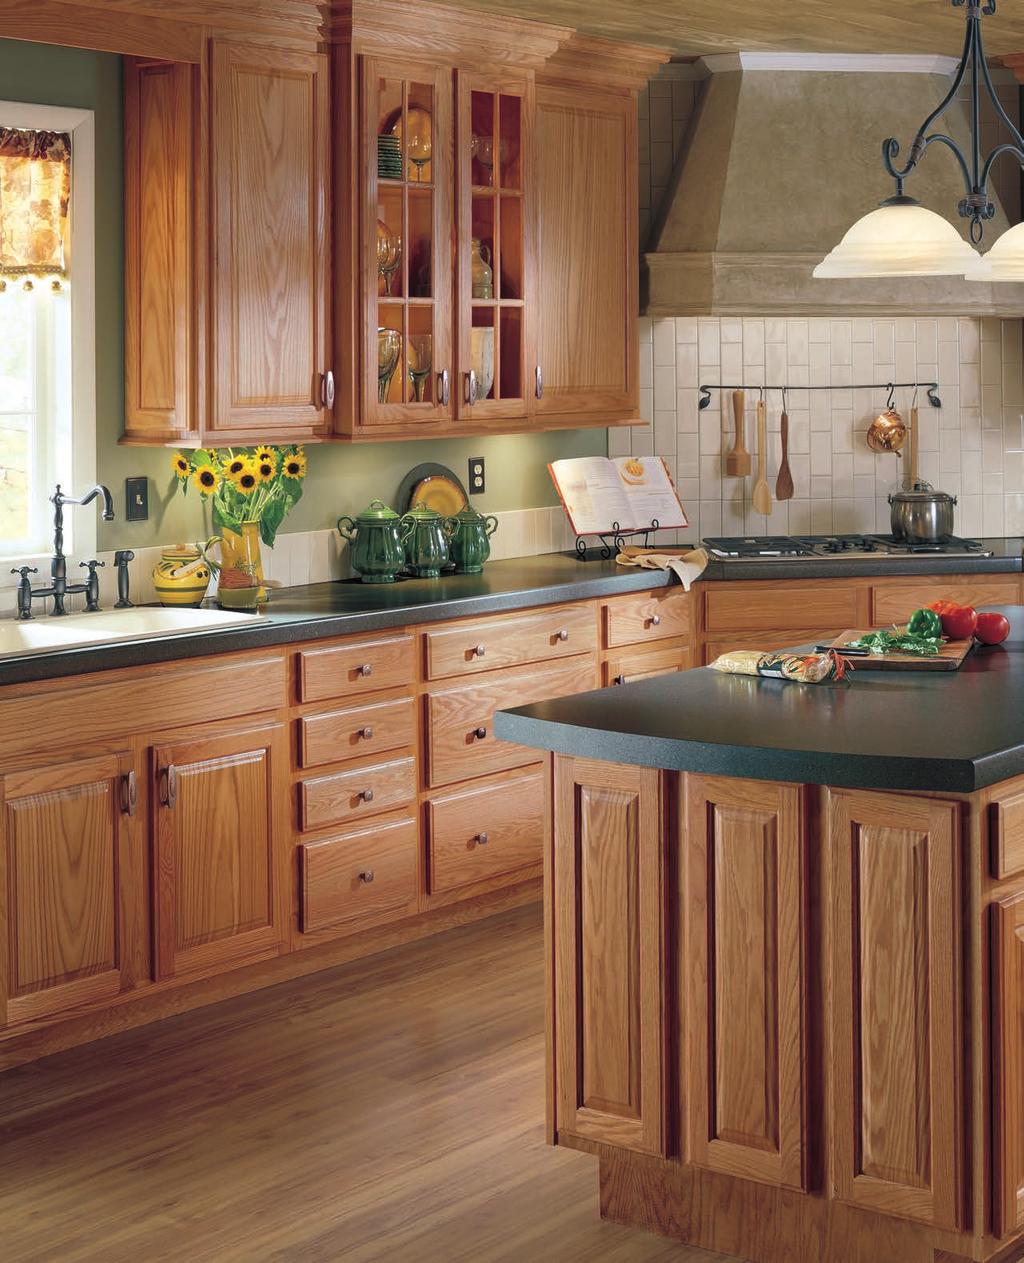 14 Echelon Cabinetry Oak Cabinetry With its inherent strength, durability and natural beauty, oak